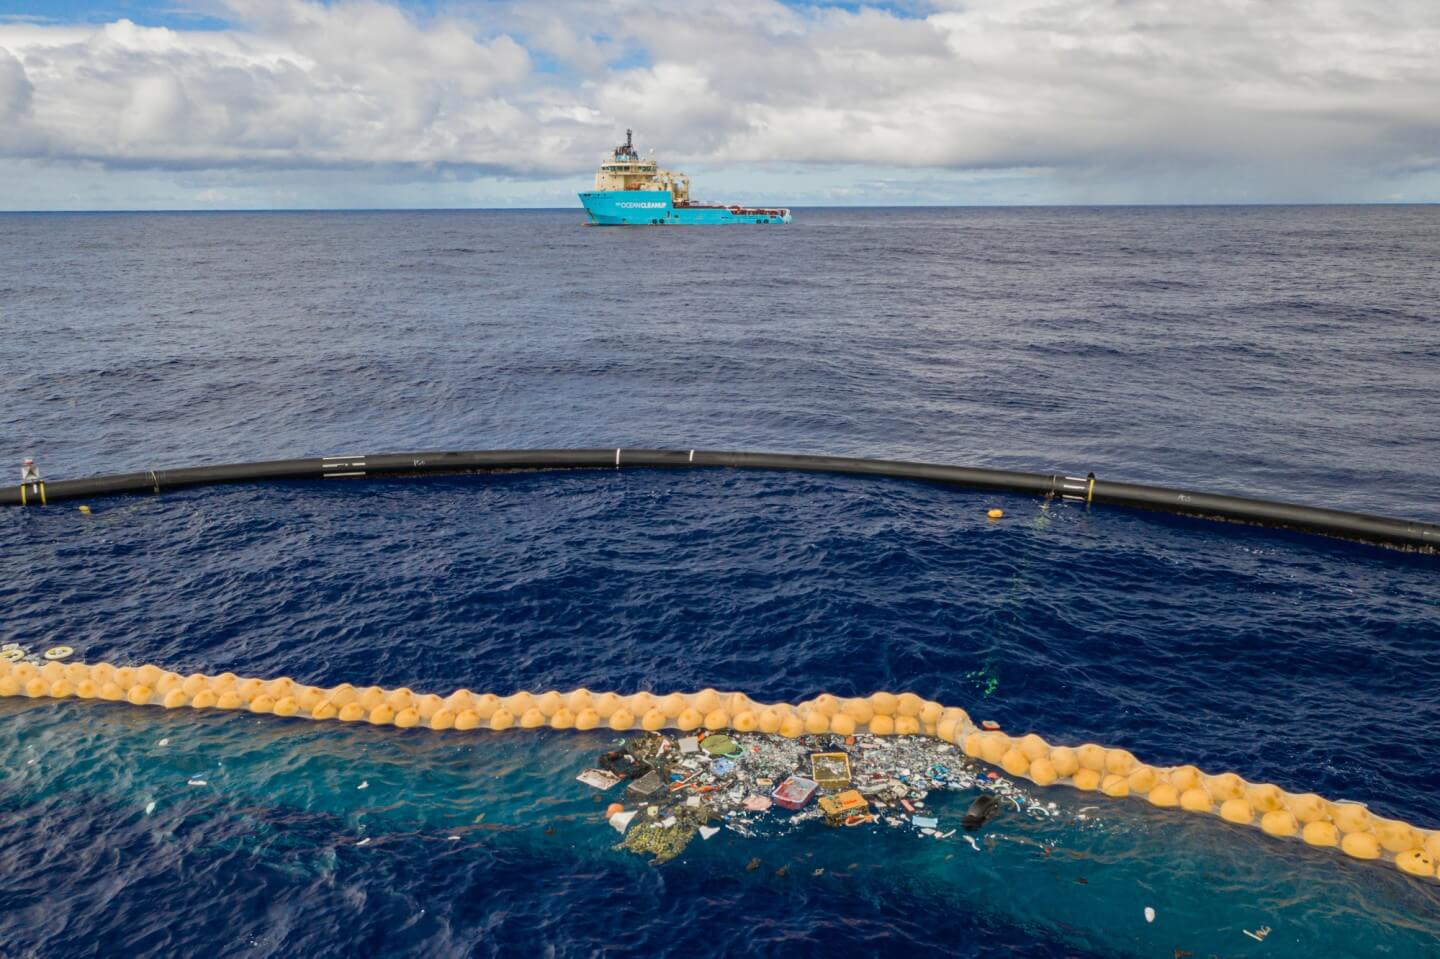 A large-scale project to clean up oceans from plastic aozora resumed its work